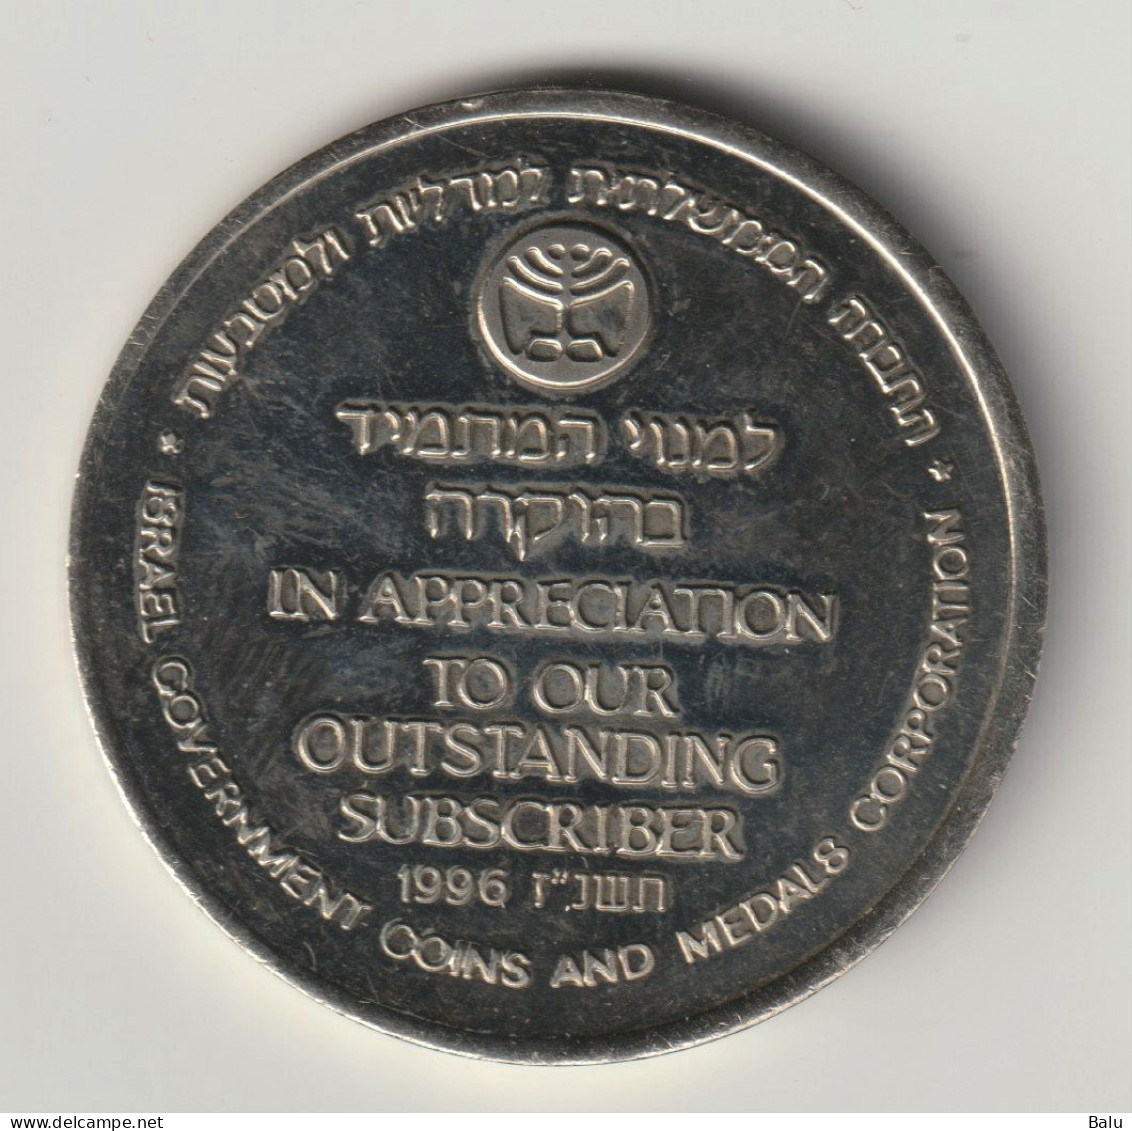 1996 Medaille. Israel. In Appreciation To Our Outstanding Subscribers. ... And The Bush Was Not Consumed - Israel